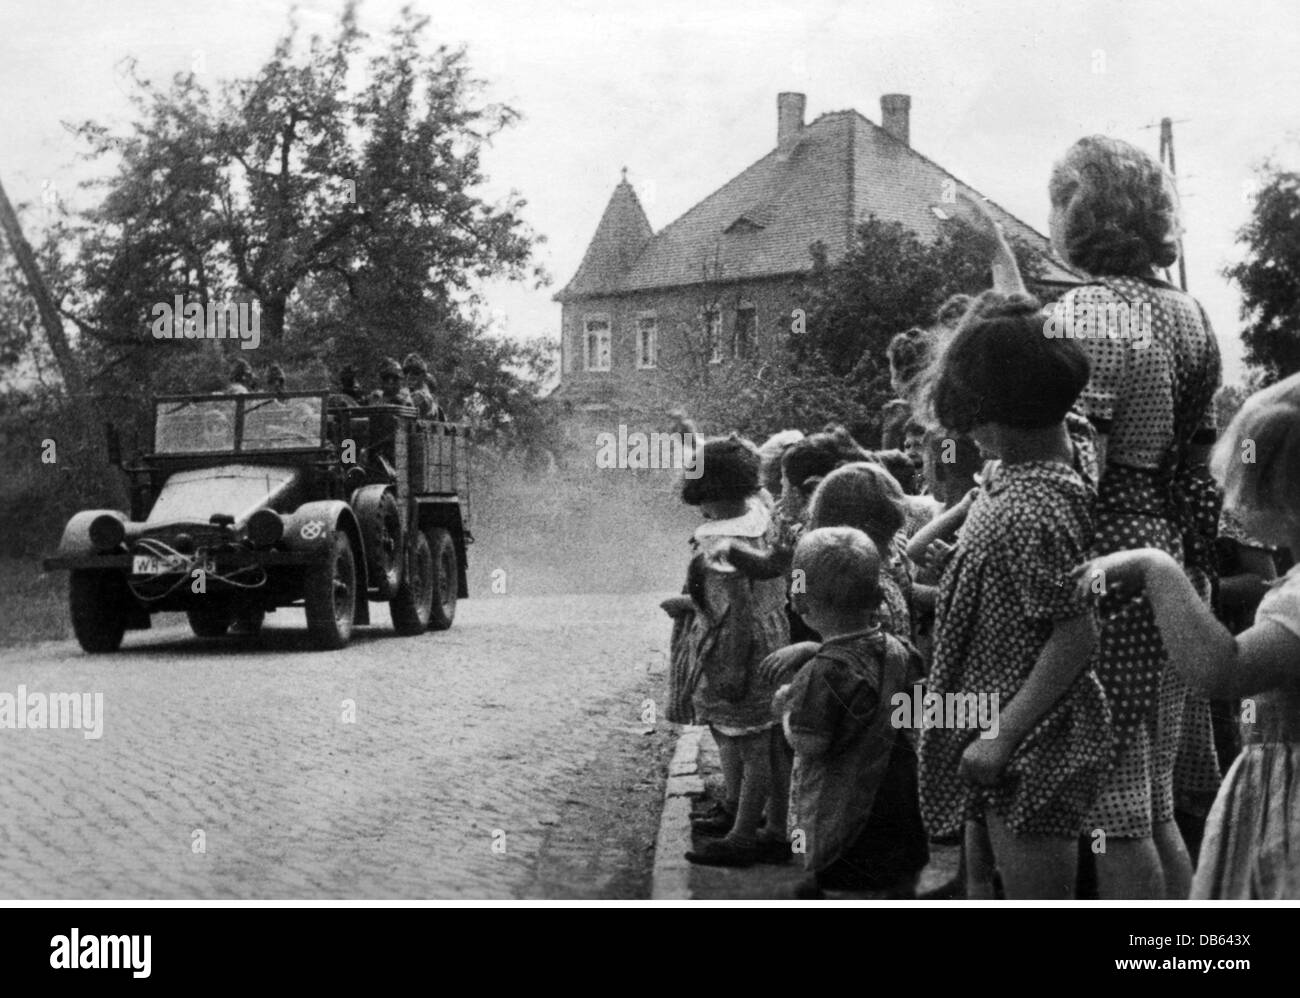 events, Second World War / WWII, German Wehrmacht, soldiers of the 19th Panzer Division leaving their garrisons to take part in Operation 'Barbarossa', the German Invasion of the Soviet Union, 10.6.1941, Additional-Rights-Clearences-Not Available Stock Photo